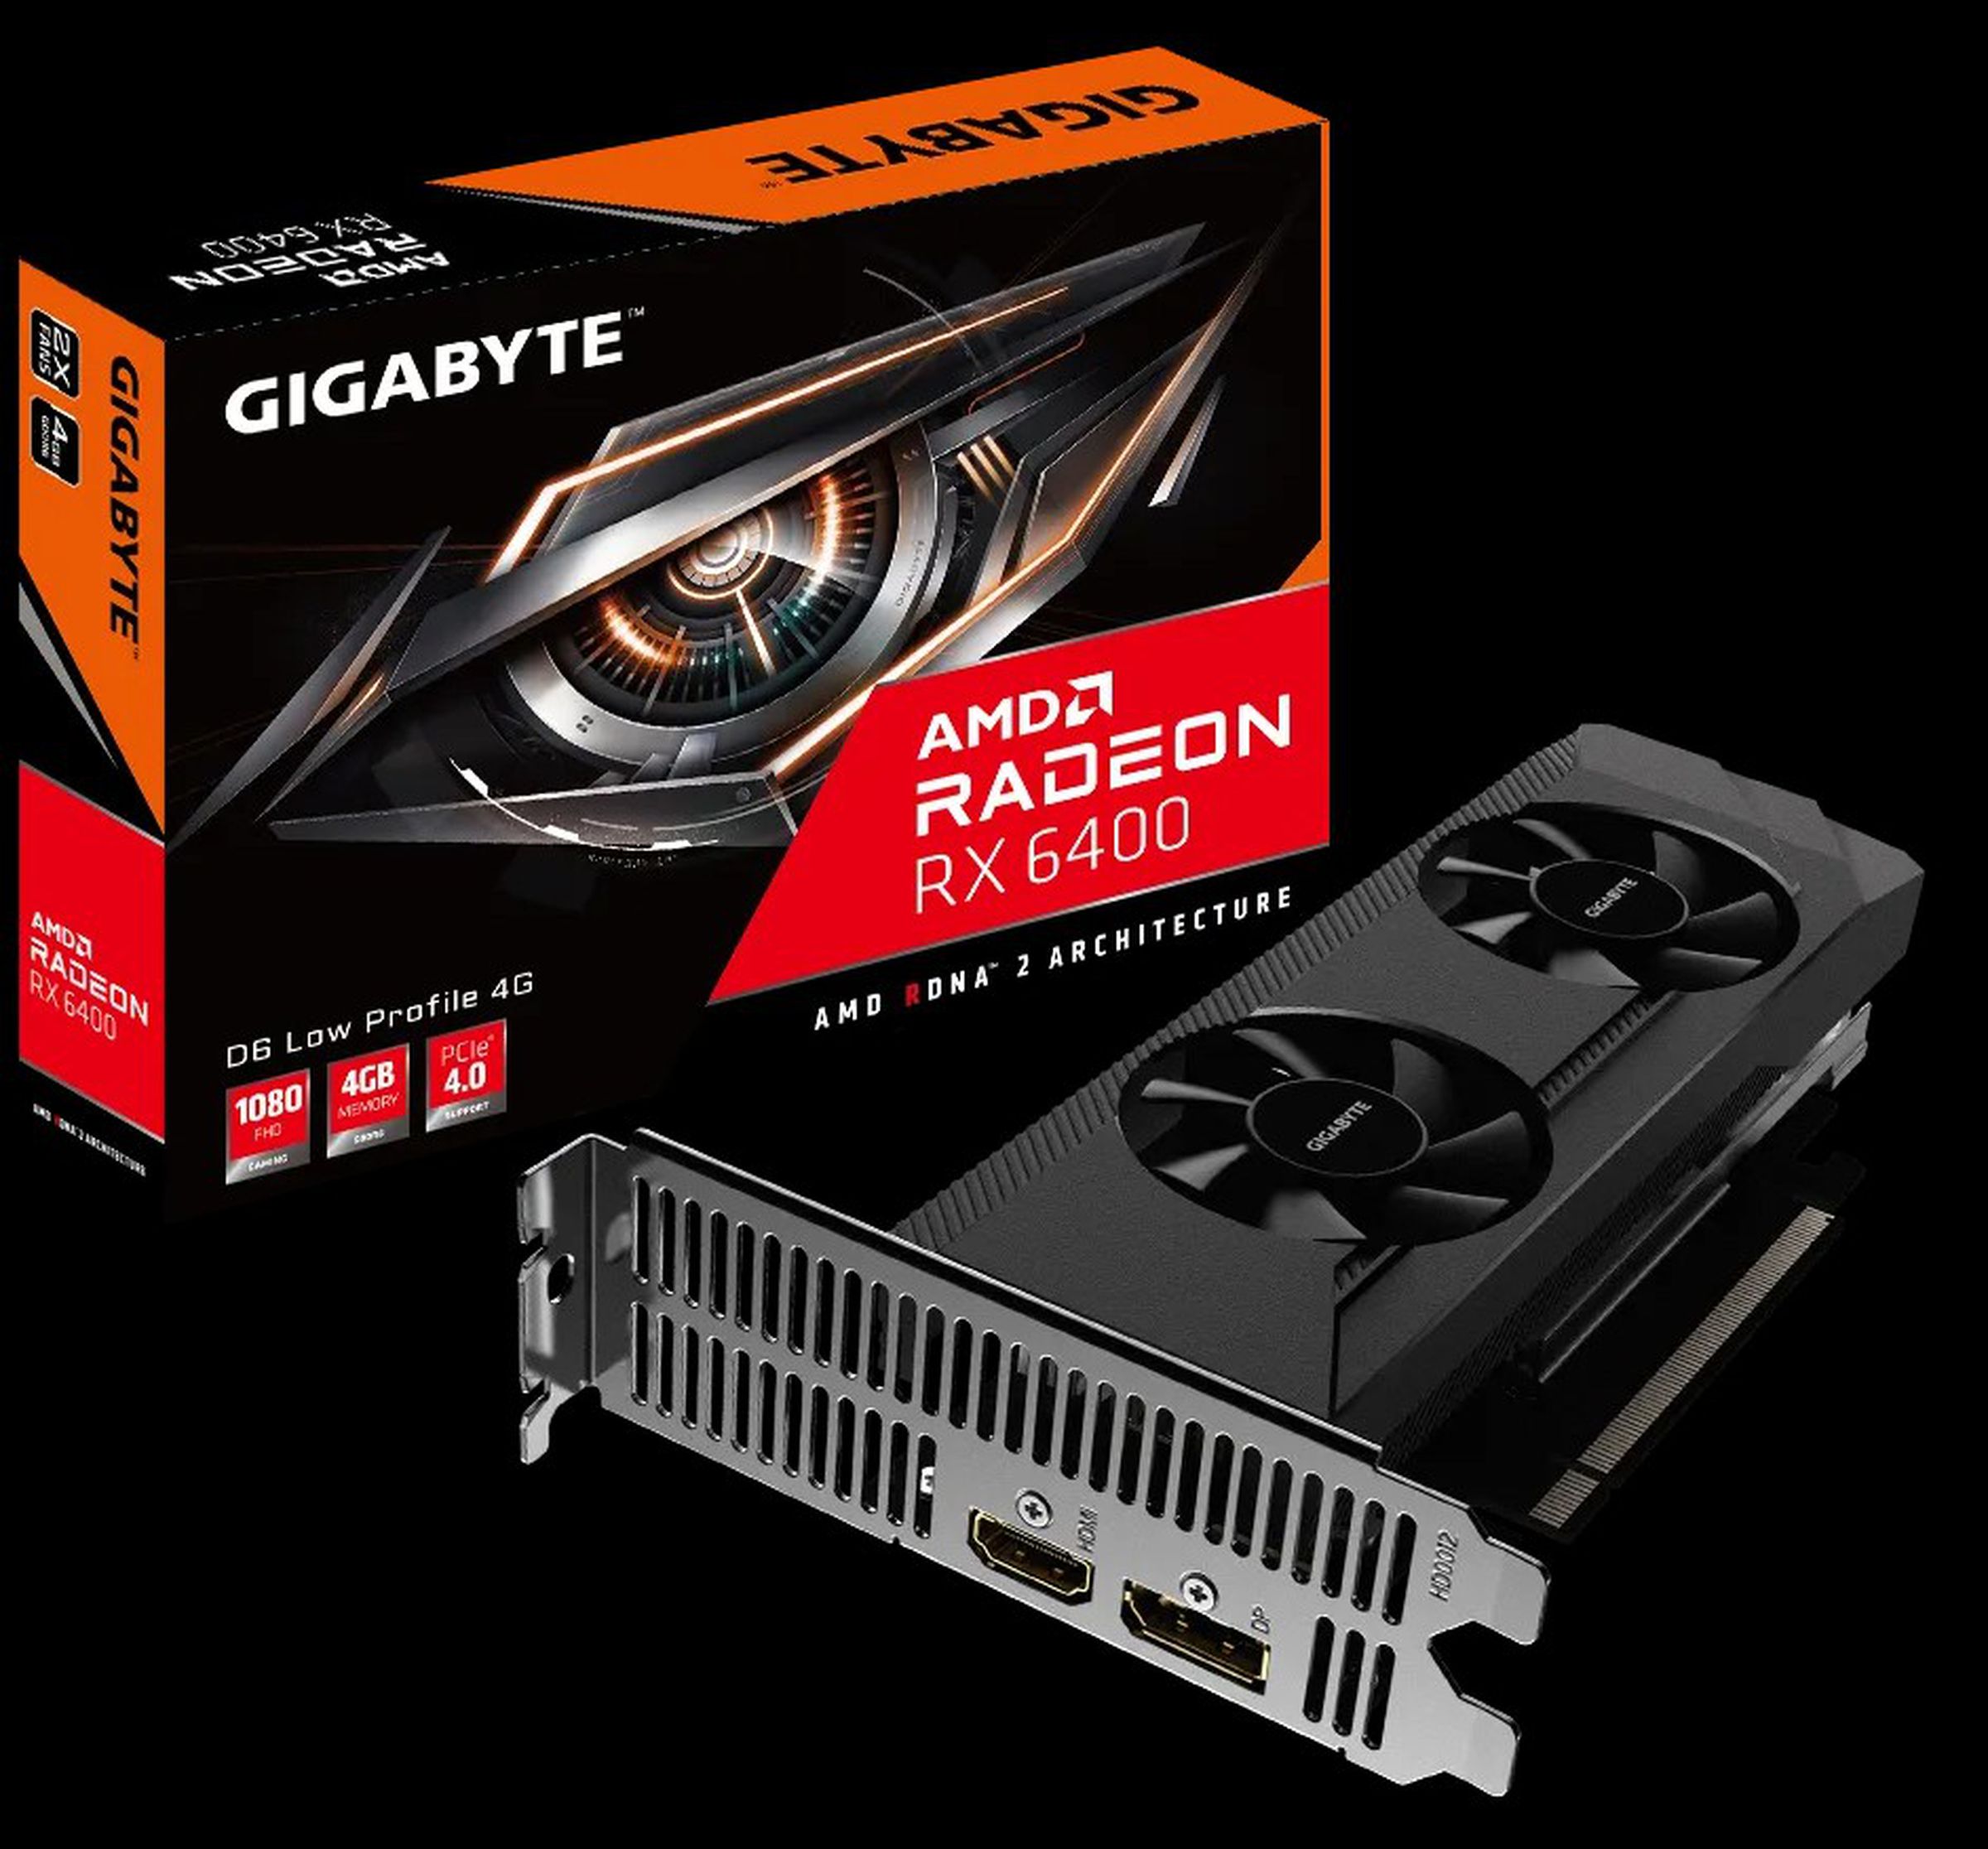 This Gigabyte model is squat but seemingly long and wide.